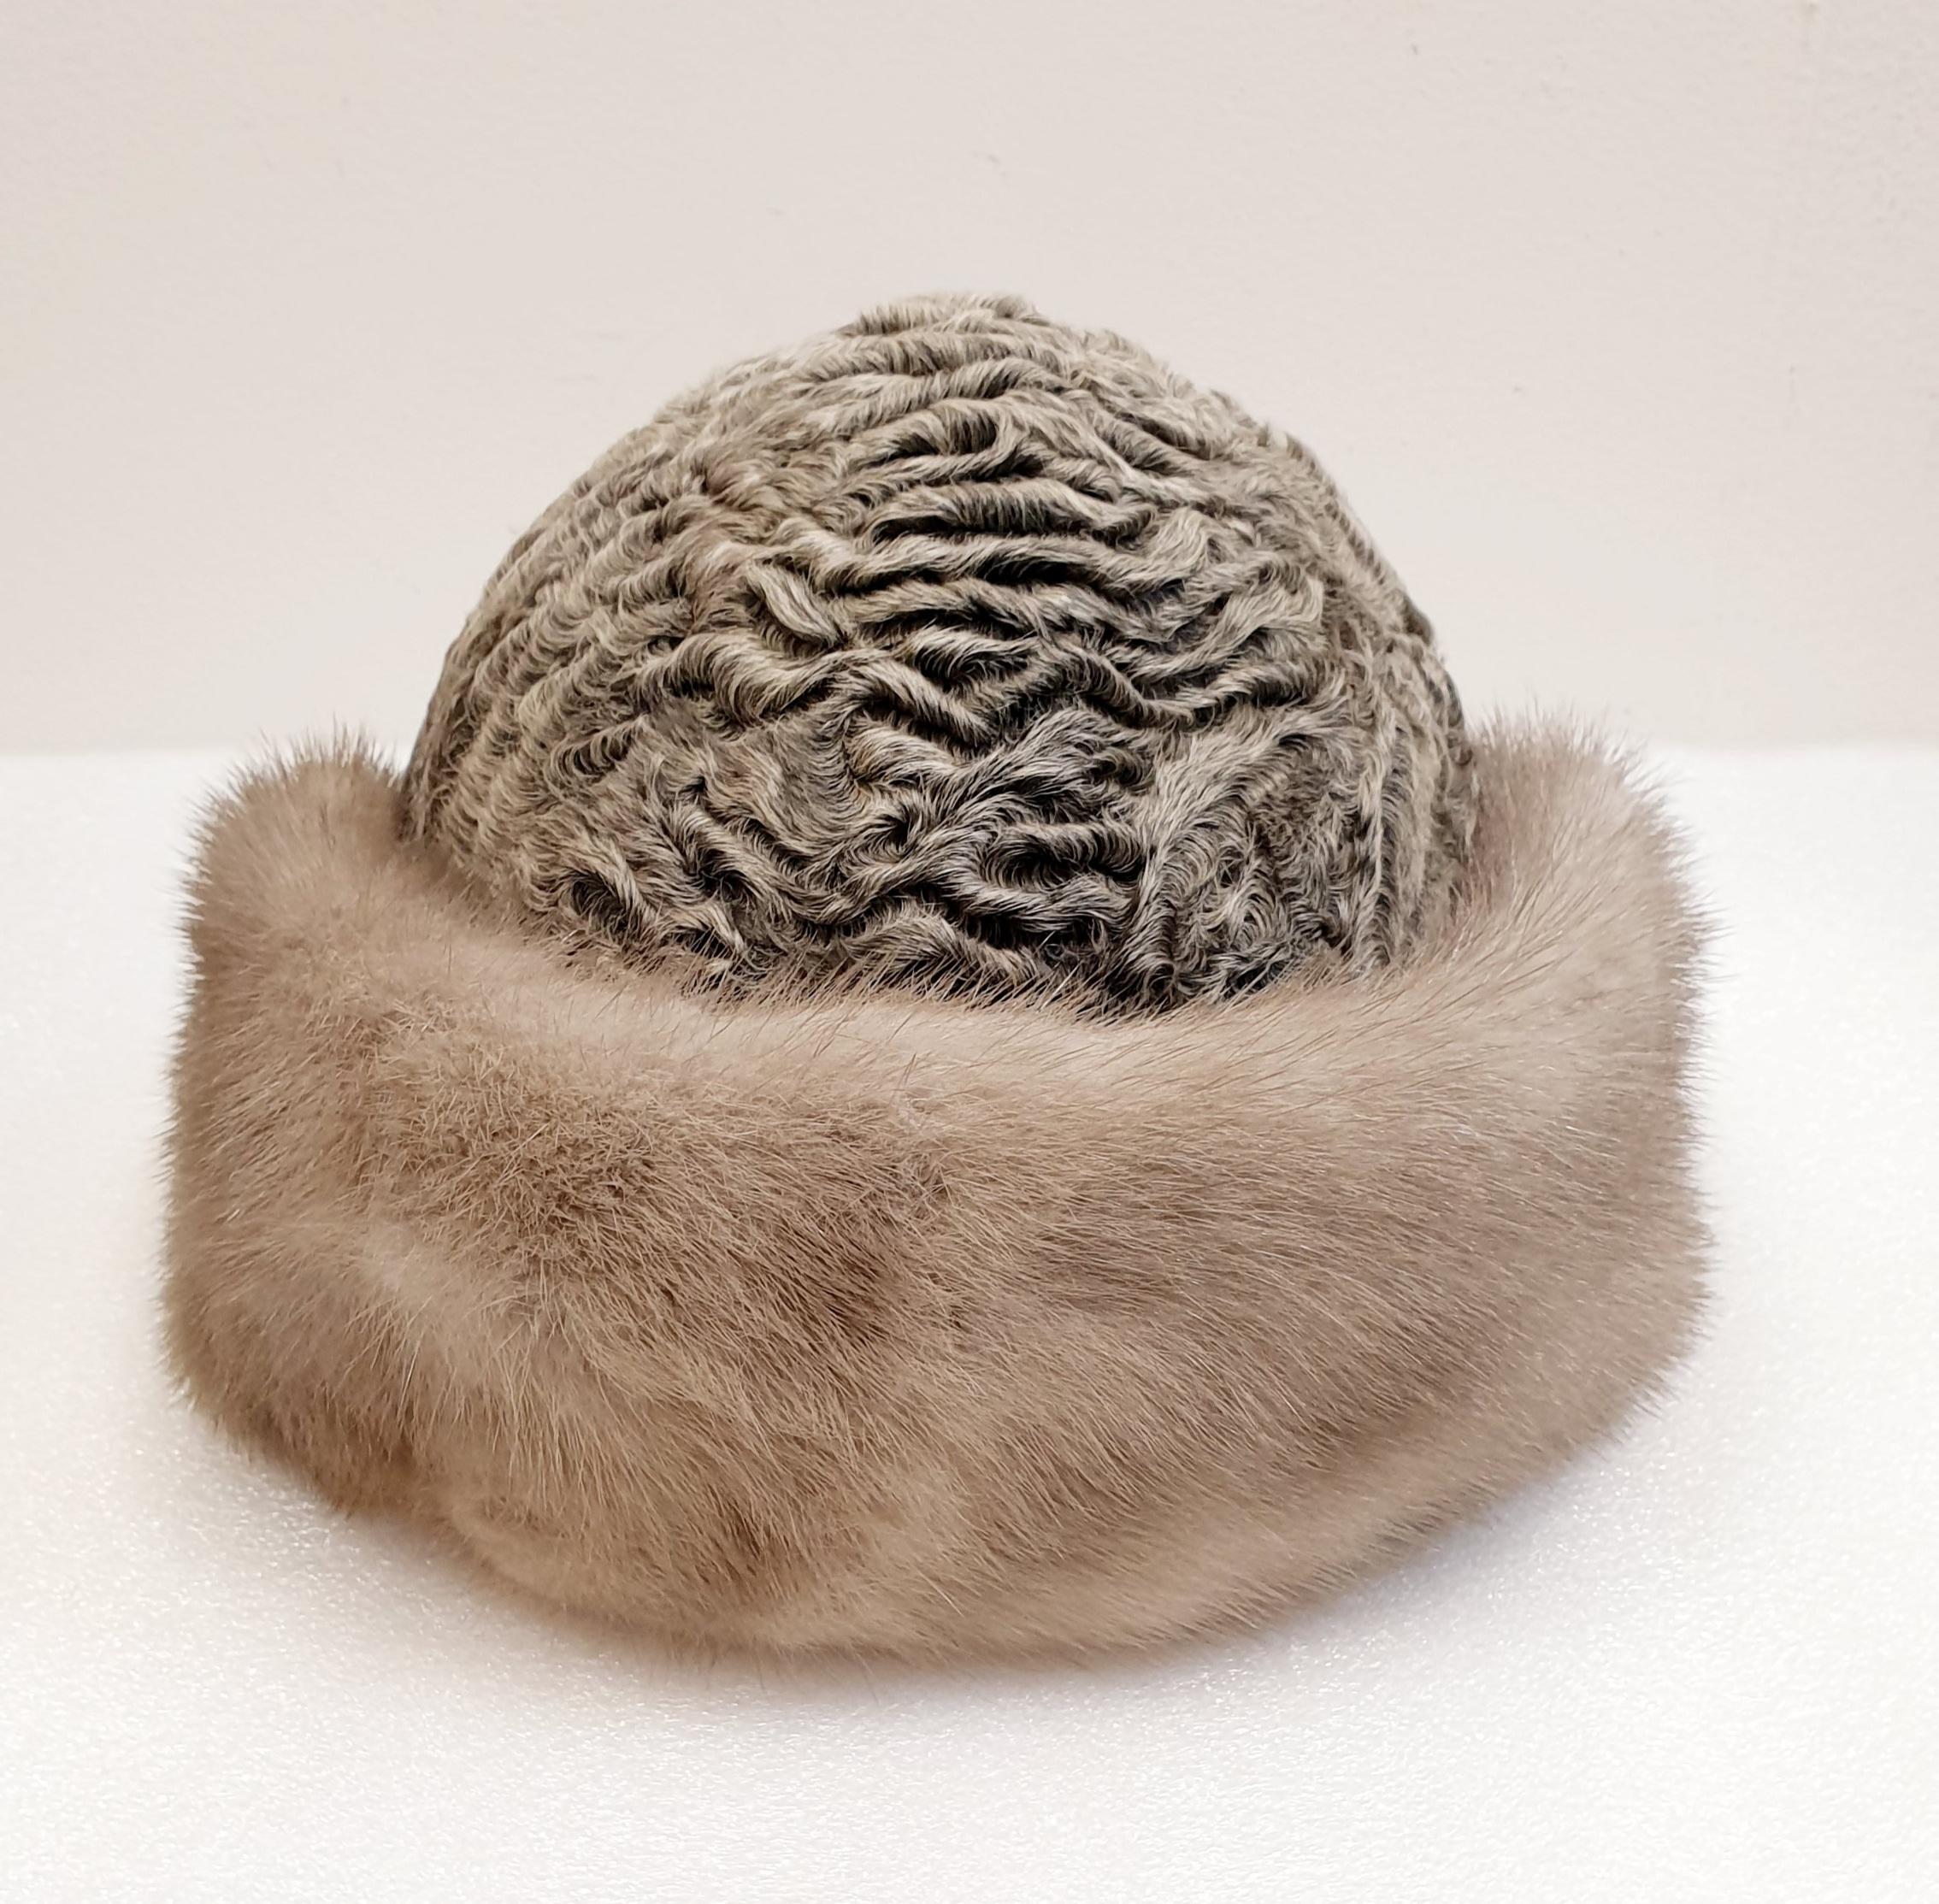 Astrakhan Mink Ambassador Cossack Hat 1960´s
100% Real Astrakhan Fur from Karakul Breed of Sheep.
Mink Cossack Style Hat
Real Mink Hair - Ranch Raised, Incredibly Luxurious
Mink hair is short, silky and lustrous hair
Sweatband with felt pad that